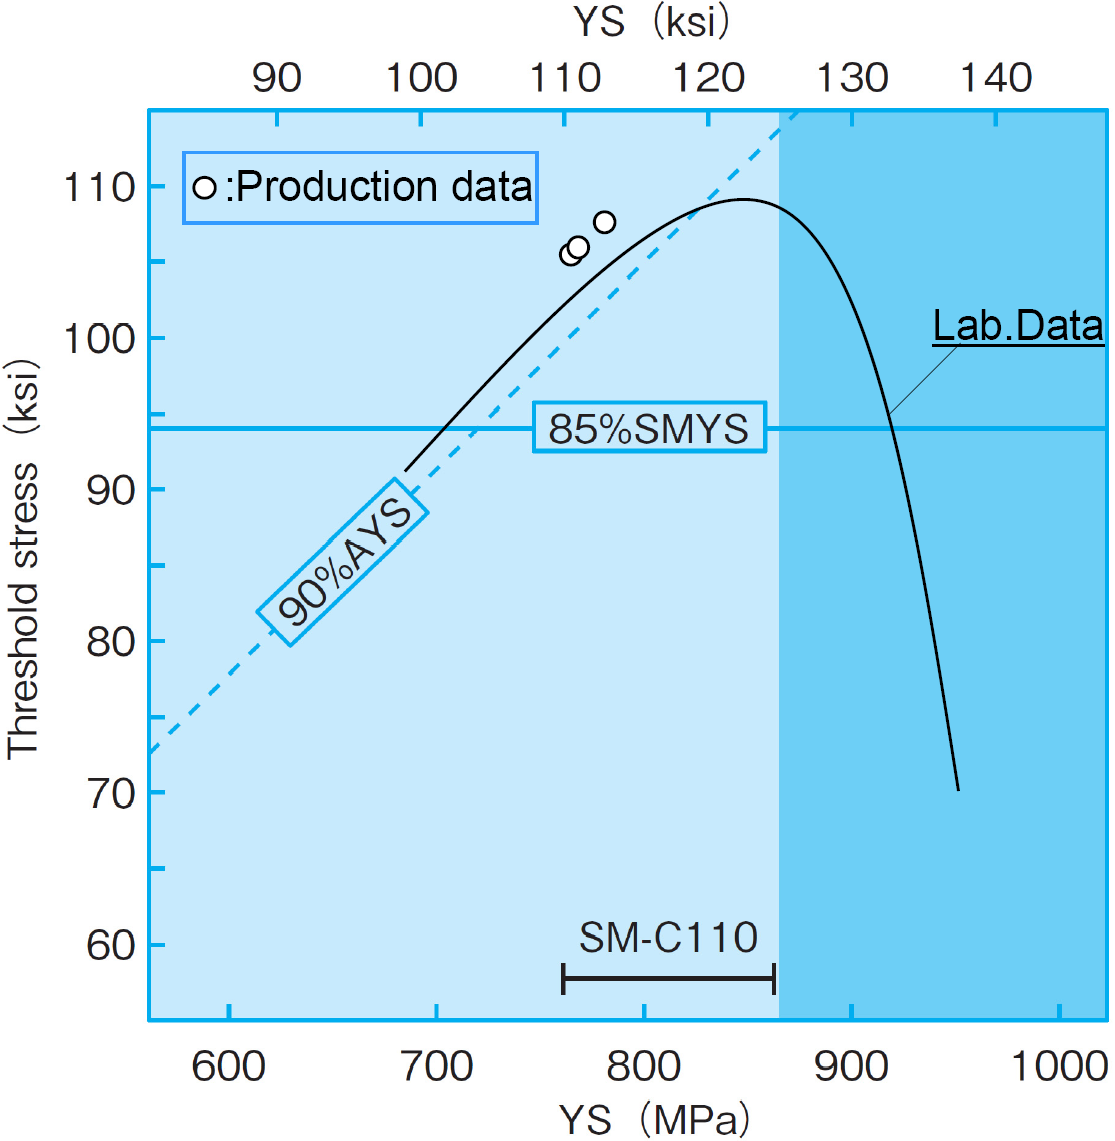 SM-C110 SSC susceptibility to material Yield Strength and applied threshold stress.